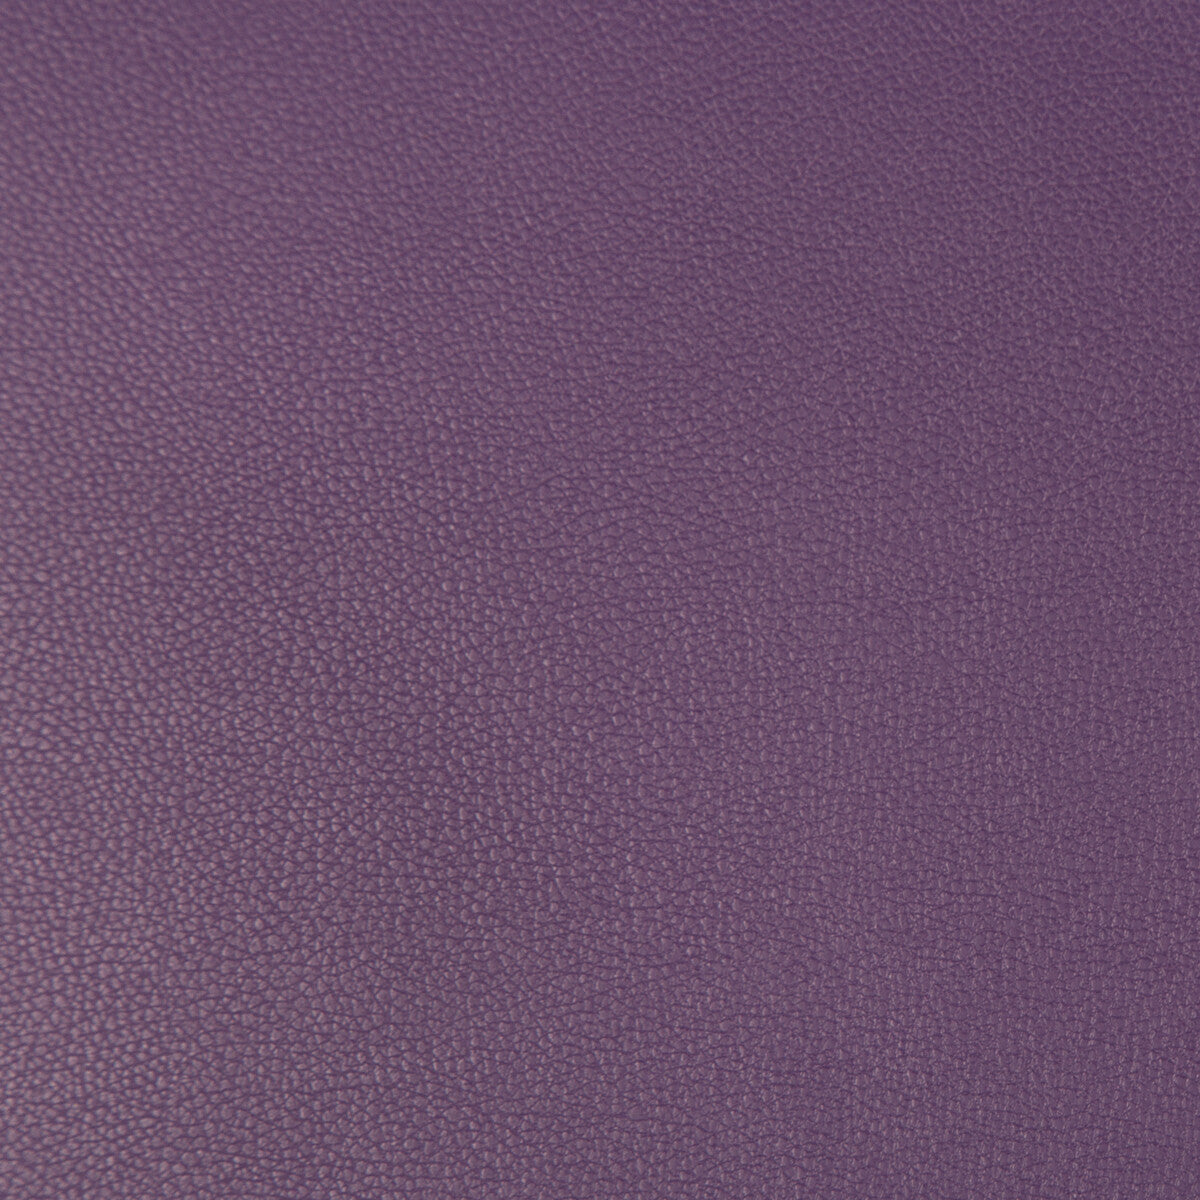 Syrus fabric in grape color - pattern SYRUS.10.0 - by Kravet Contract